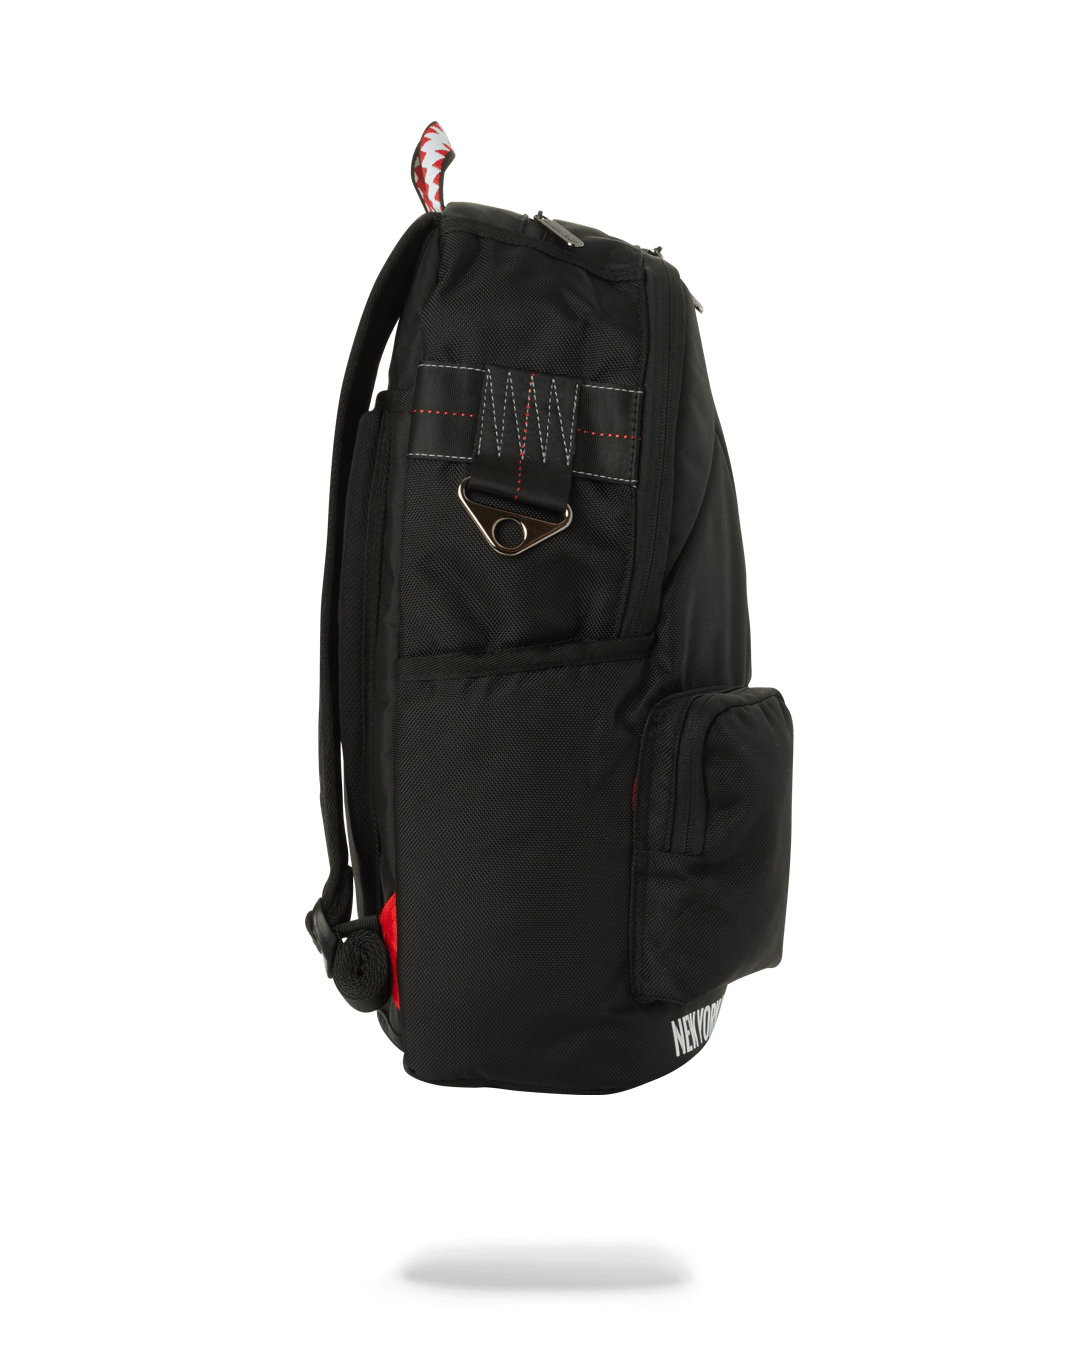 Cheap - Sale Sprayground Shadow Shark Backpack Discount authentic sale - At www.bagssaleusa.com